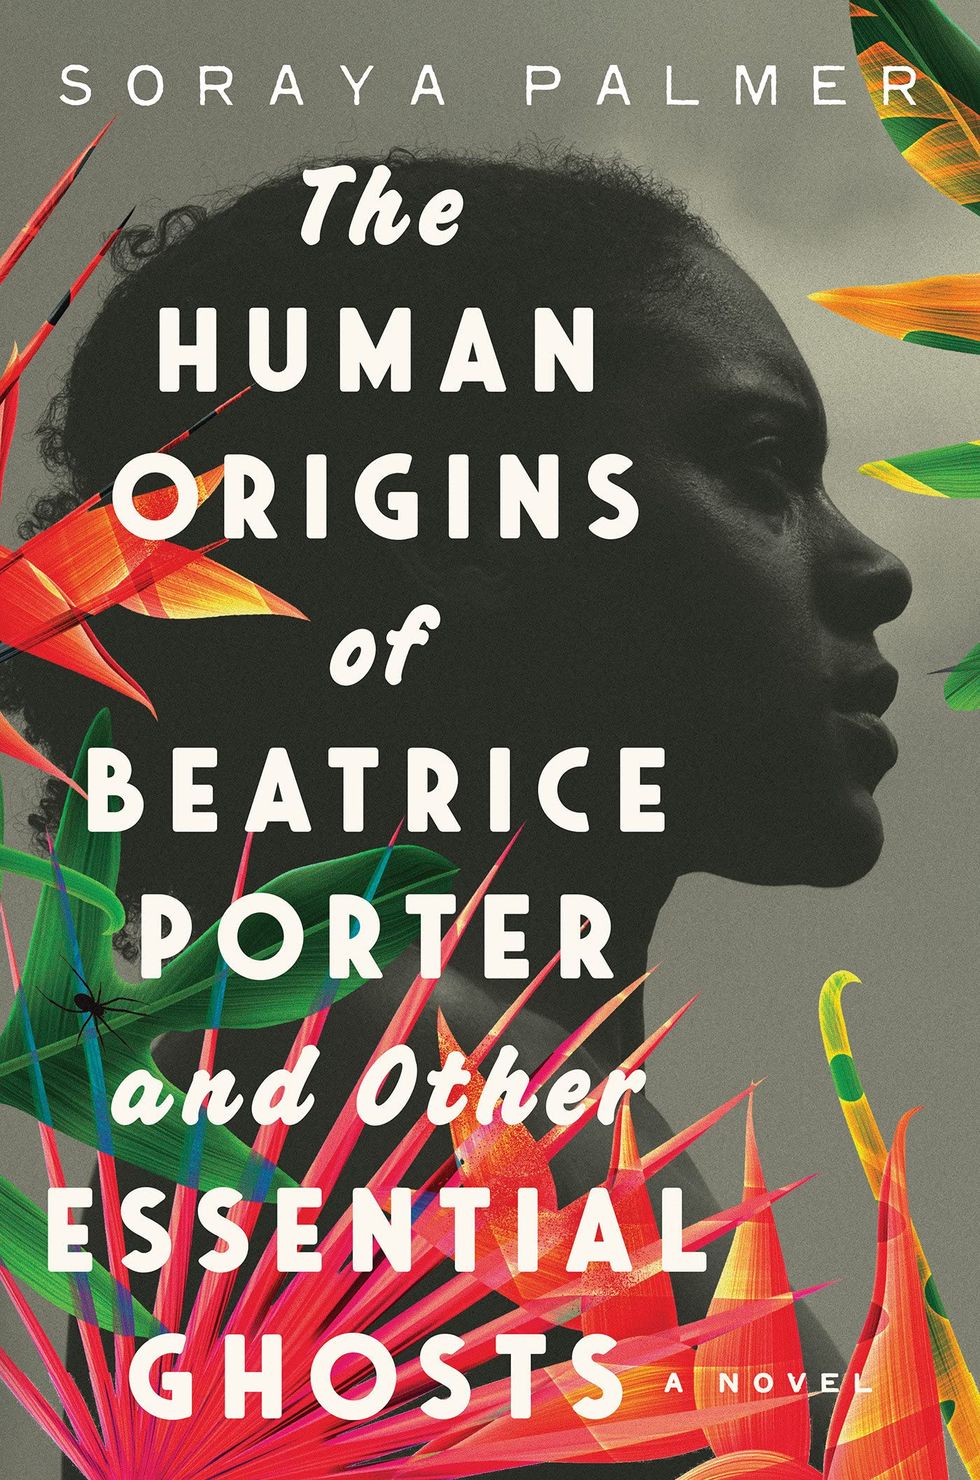 <i>The Human Origins of Beatrice Porter and Other Essential Ghosts</i>, by Soraya Palmer